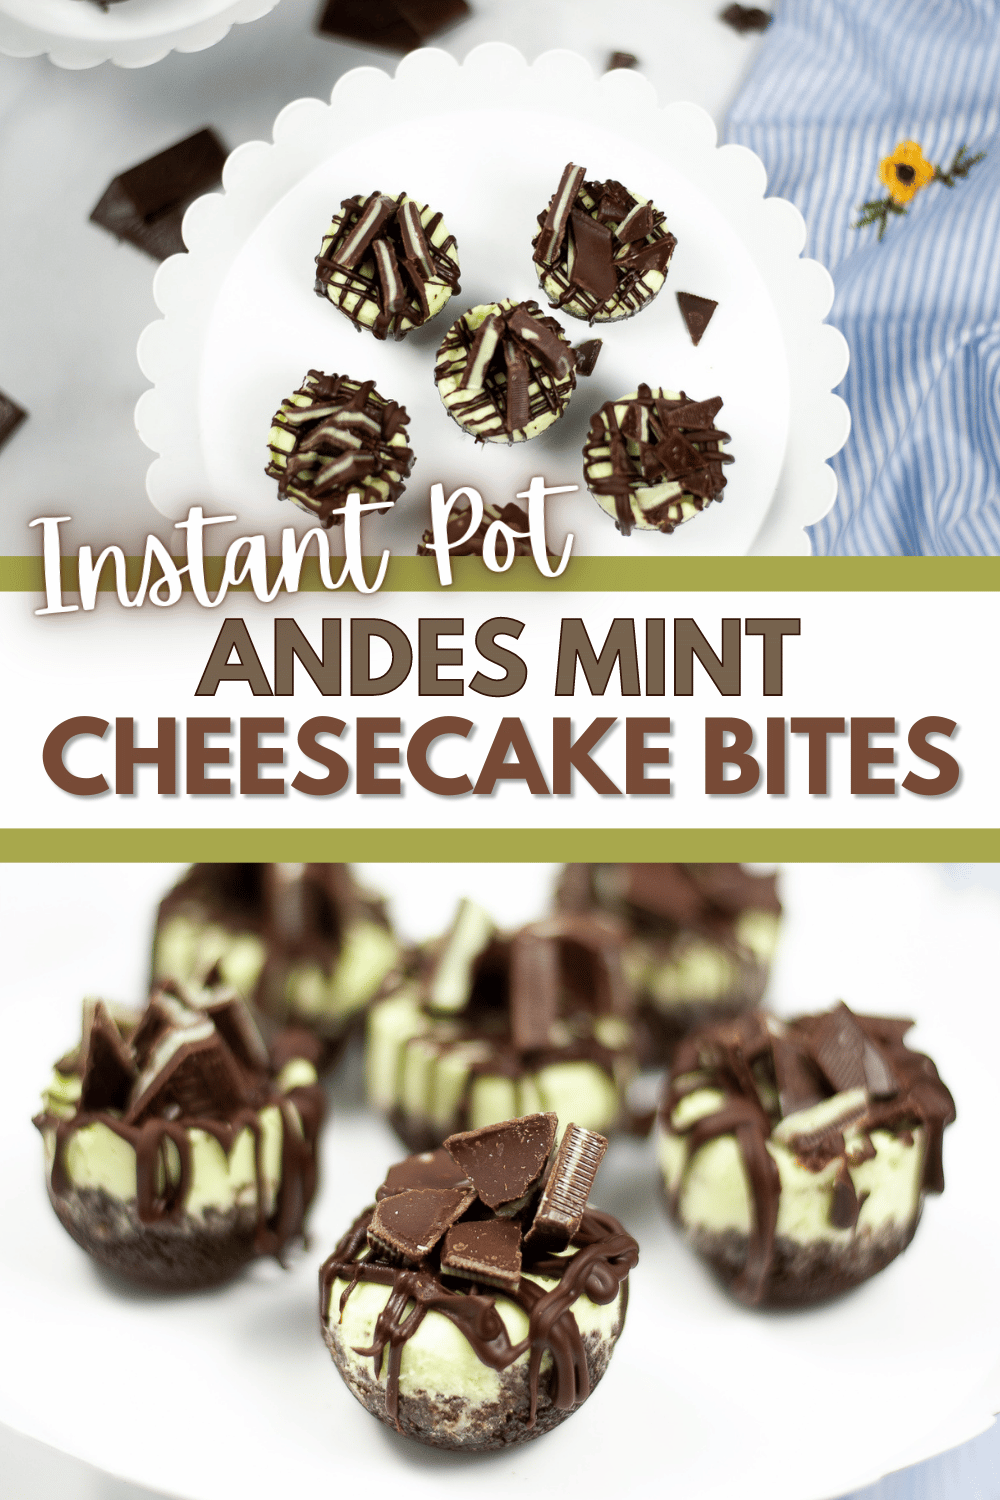 These Instant Pot Andes Mint Cheesecake Bites are so flavorful and delicious! Your friends and family will be begging for more! #instantpot #pressurecooker #instantpotcheesecakebites #andesmintcheesecake #cheesecakebites via @wondermomwannab